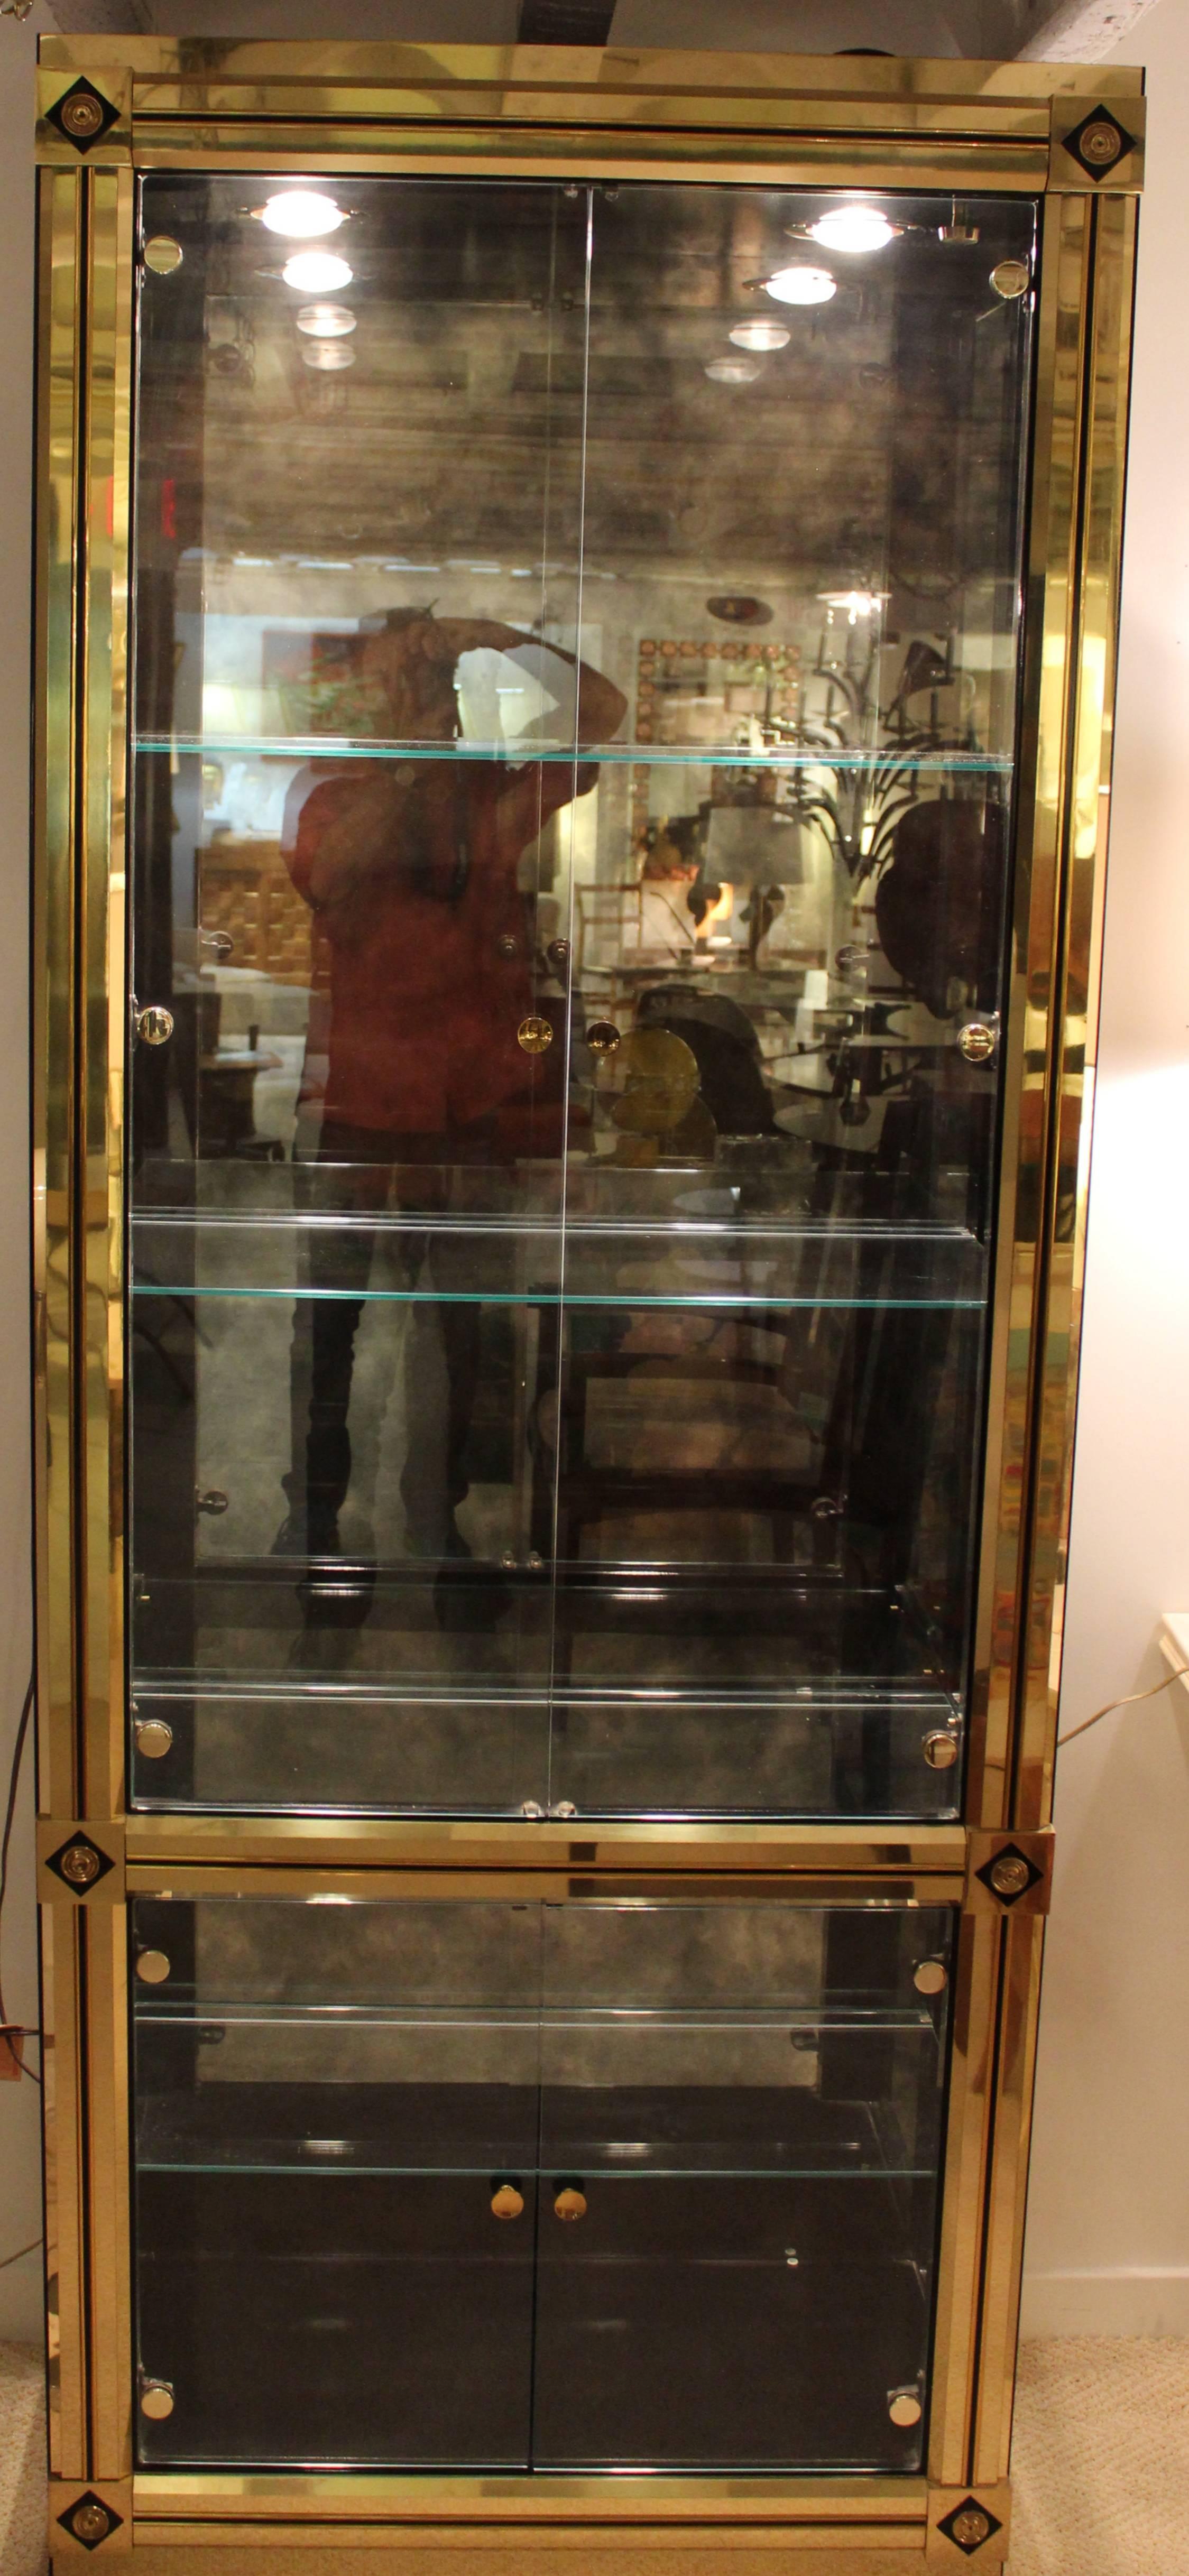 Glamorous brass clad display cabinet made by Mastercraft. The corners have black geometric trim giving this vitrine an empire revival feel. The shelves are glass with an antiqued mirrored back. The cabinet retains its original makers label. The